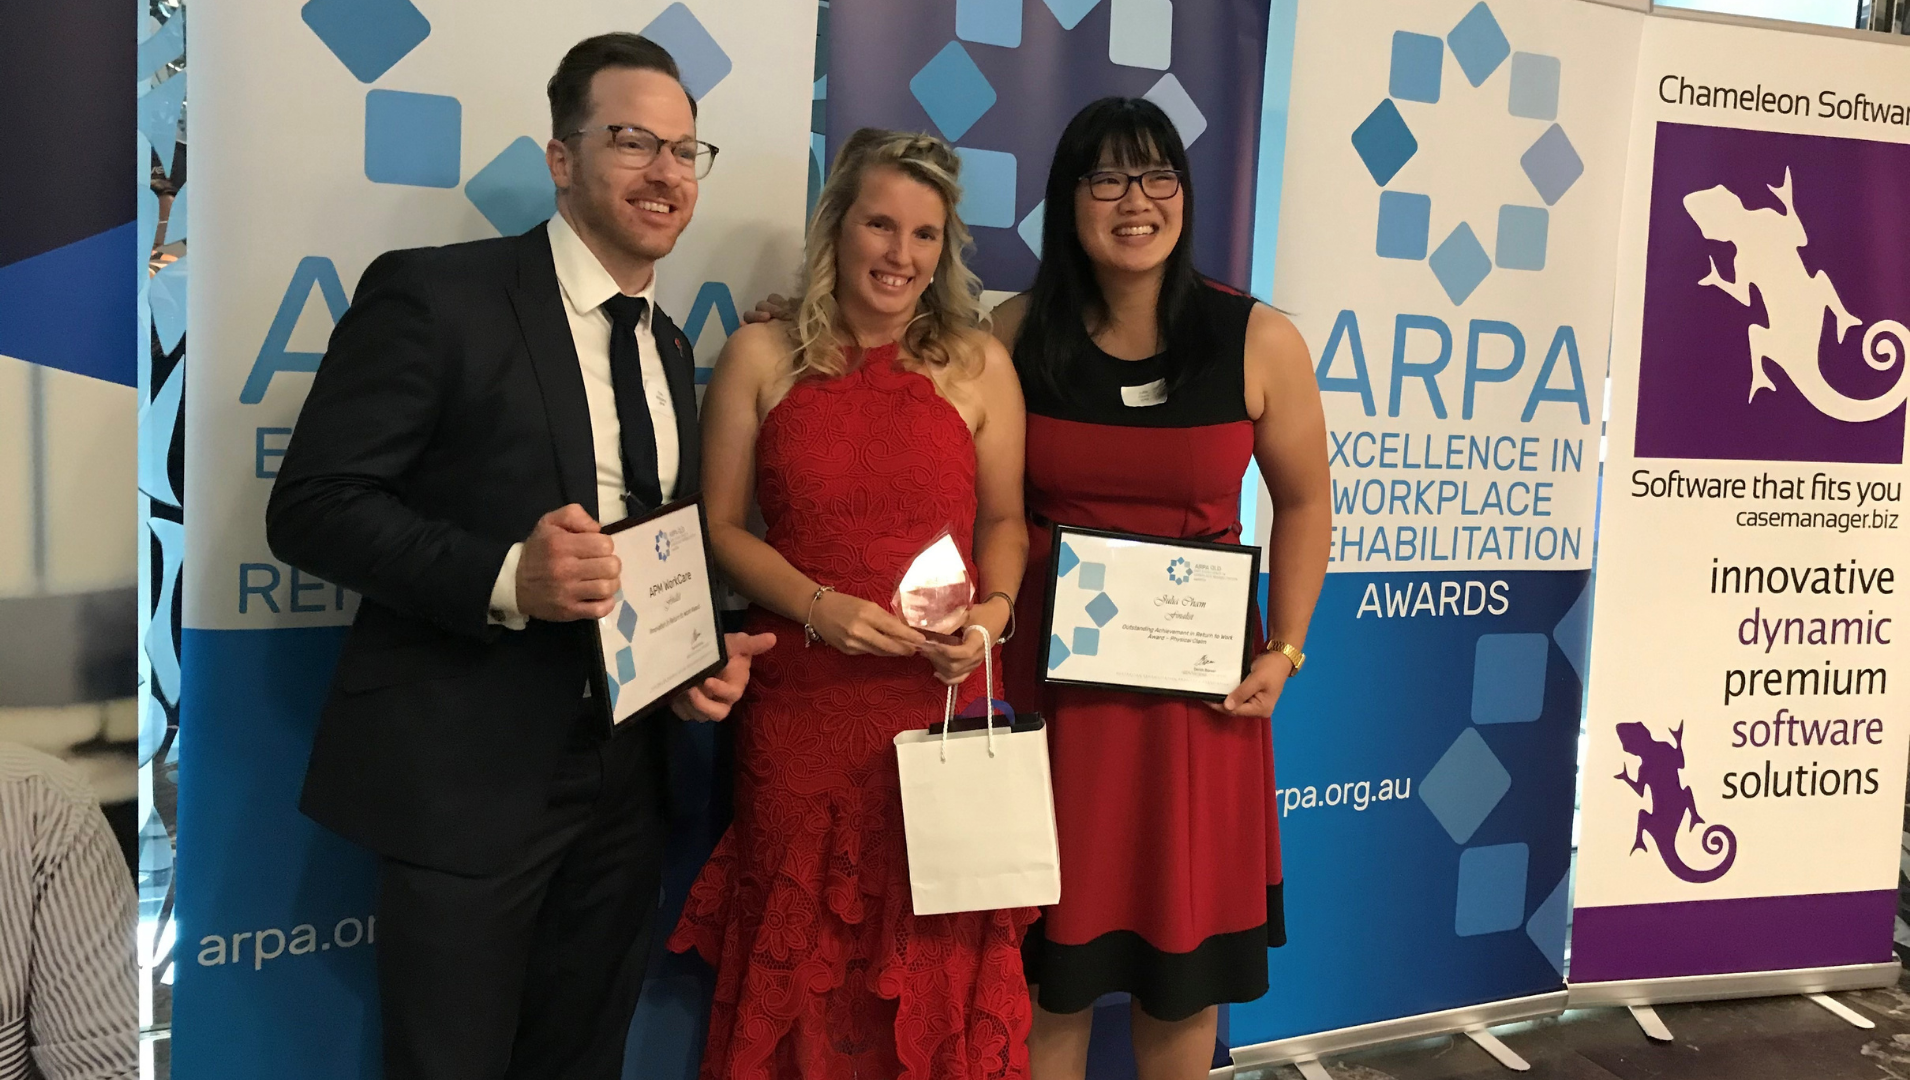 Ashlyn Dyer and her APM WorkCare Colleagues Julia Cham and Tim Williams at the ARPA awards ceremony